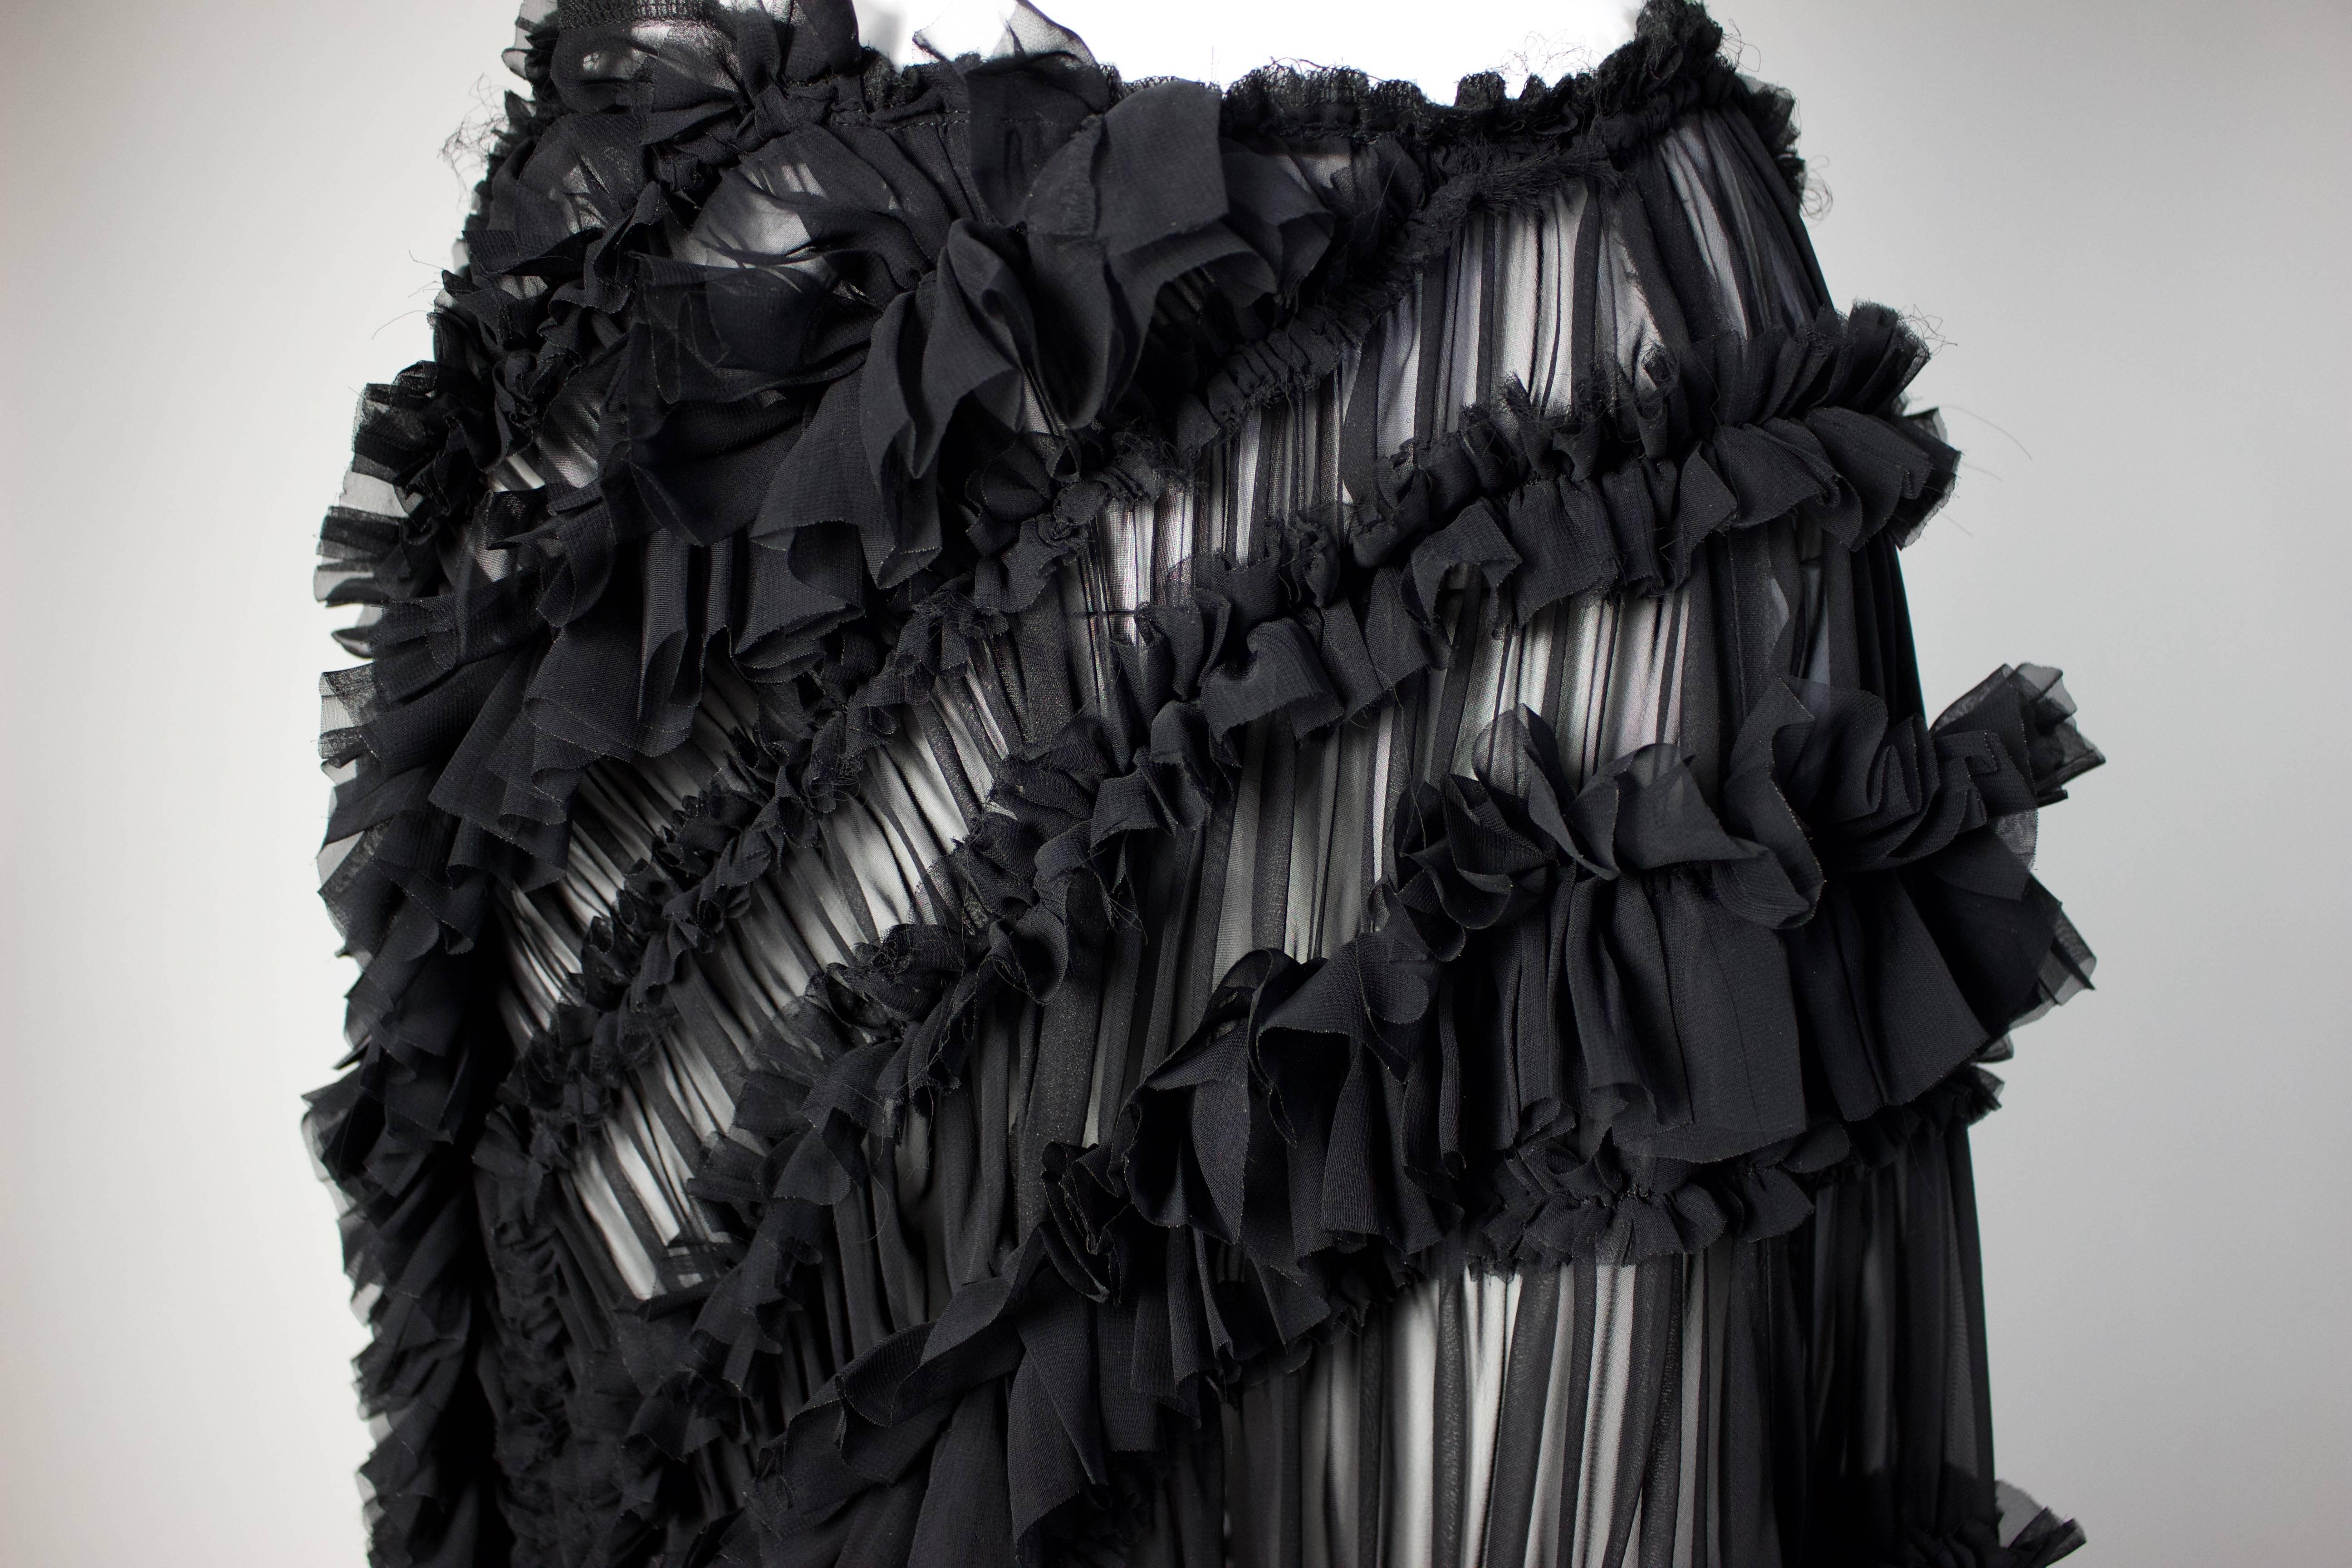 On the eve of the Metropolitan Museum of Art’s much-anticipated Rei Kawakubo retrospective comes this beautifully sublime skirt created by the Japanese designer. From her fall 2011 Comme des Garçons collection, the ruffled confection perfectly